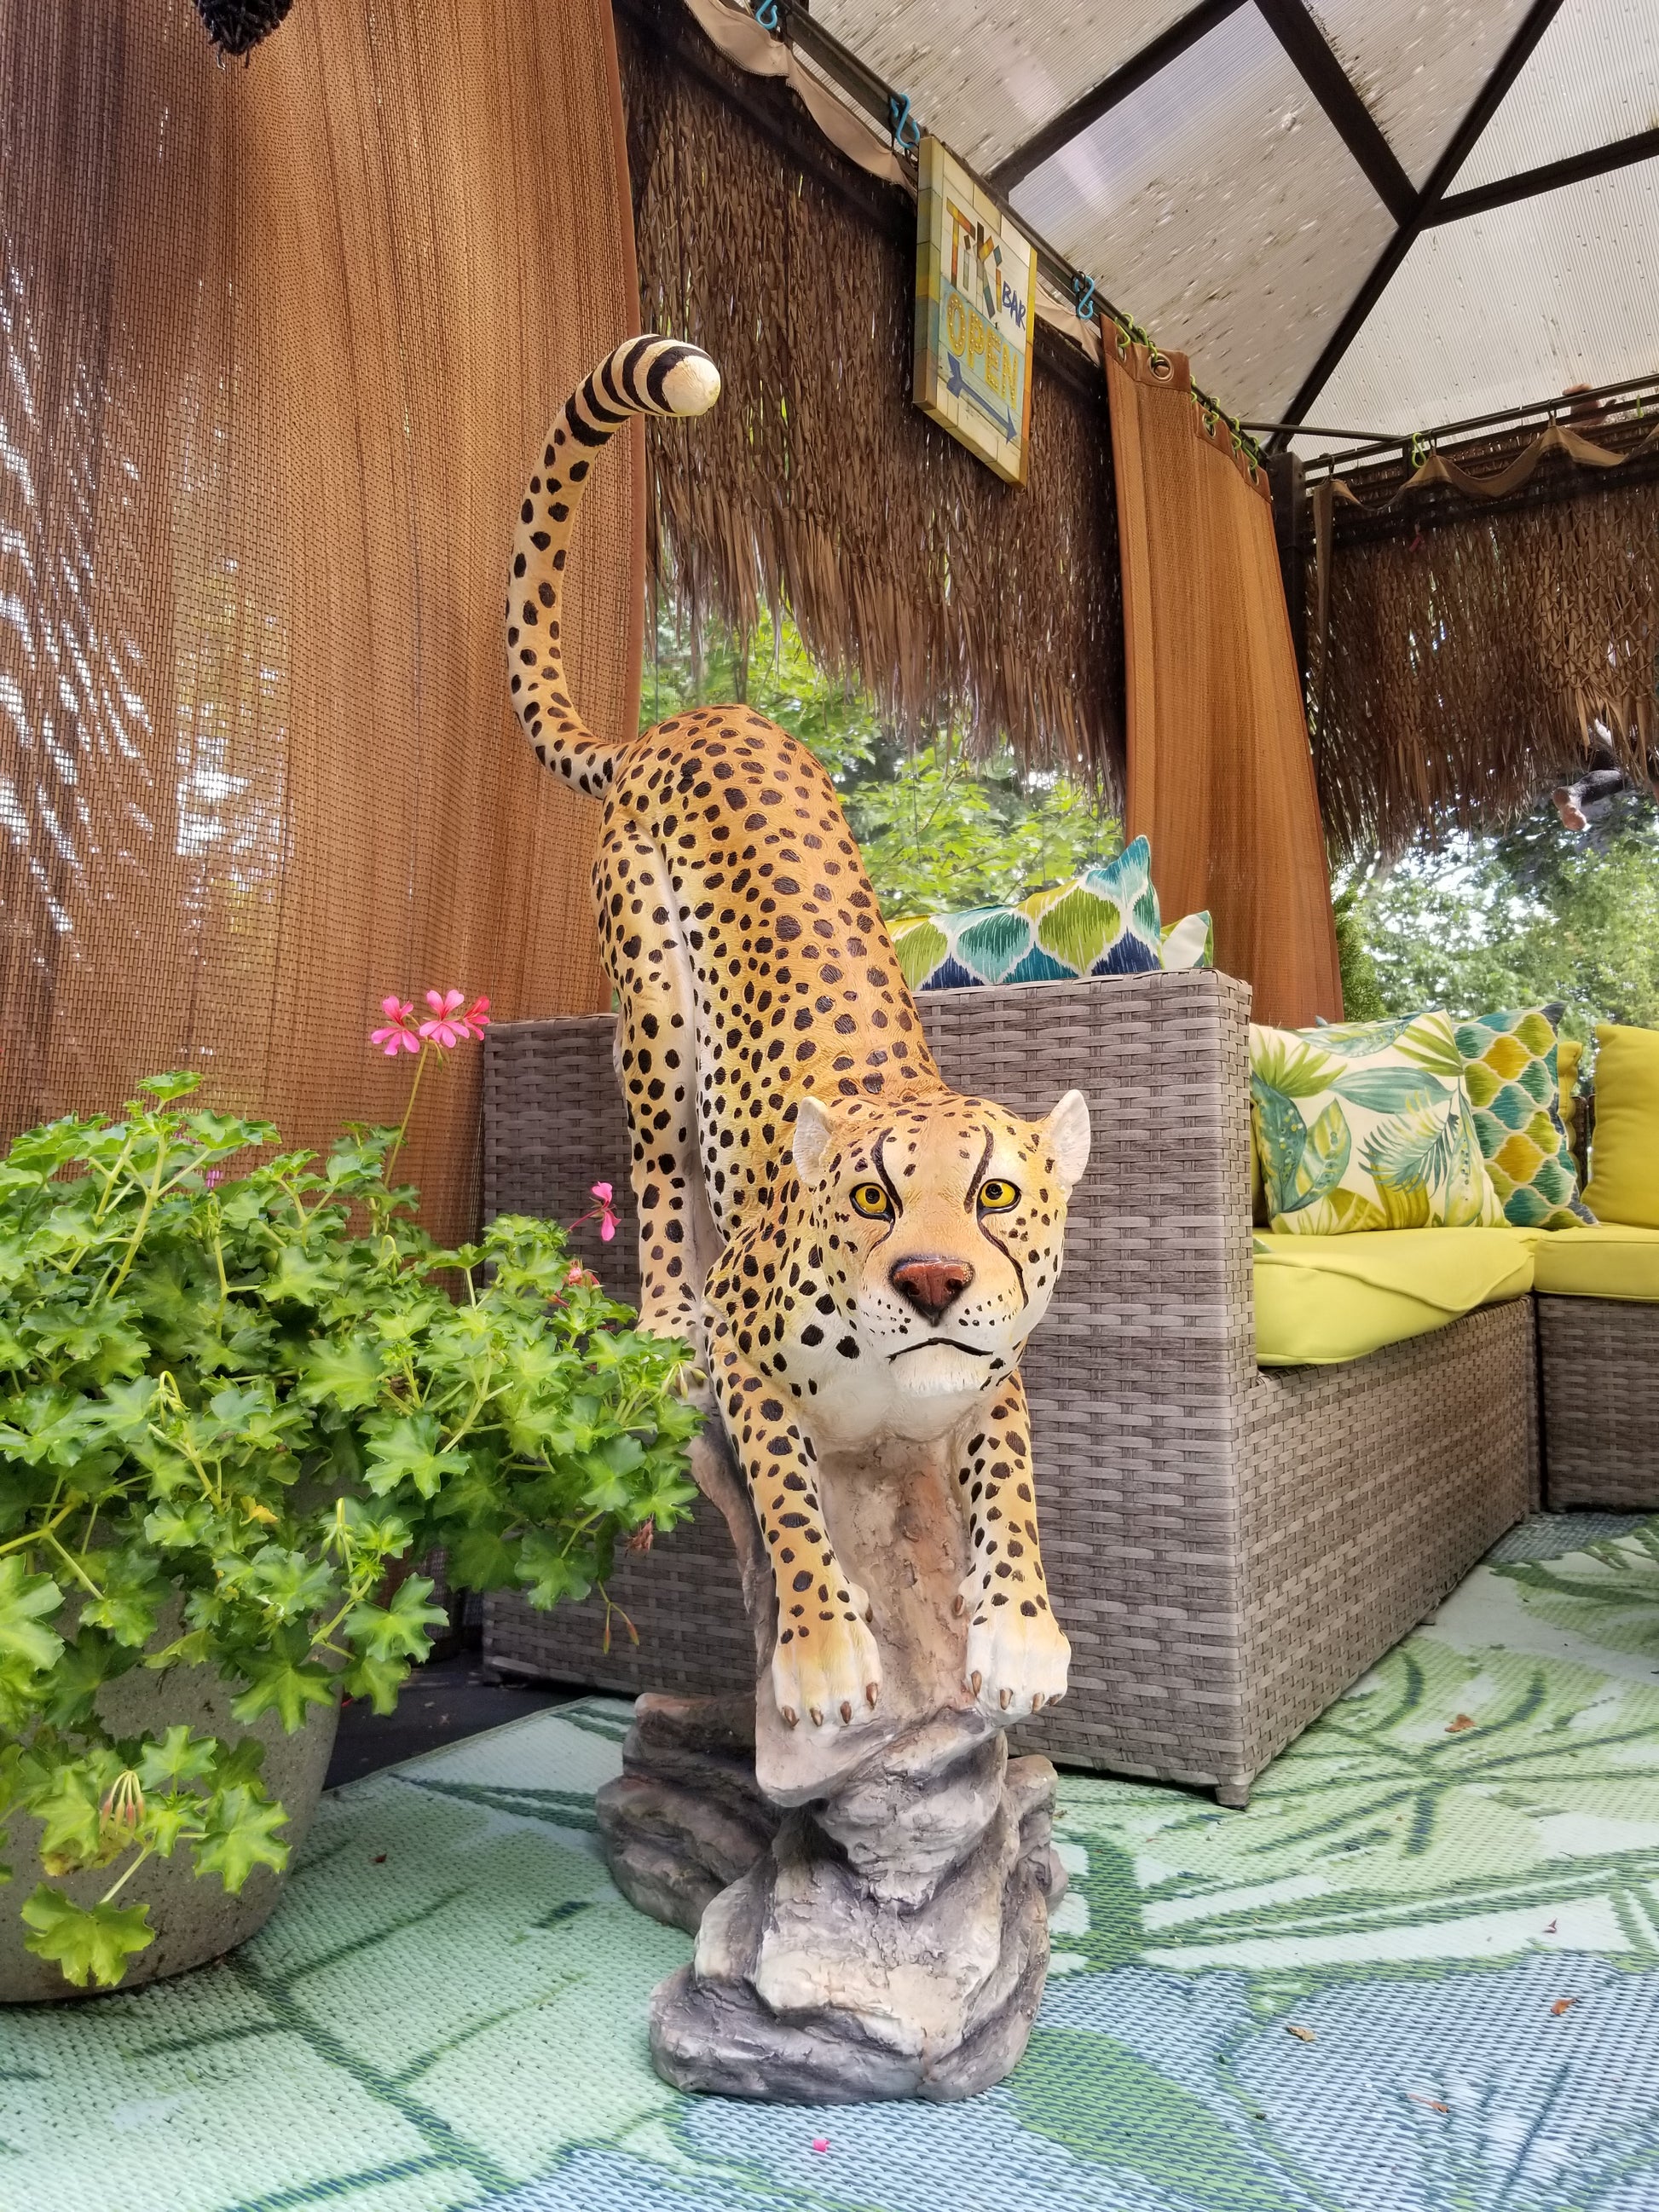 buy a cheetah statue at auction